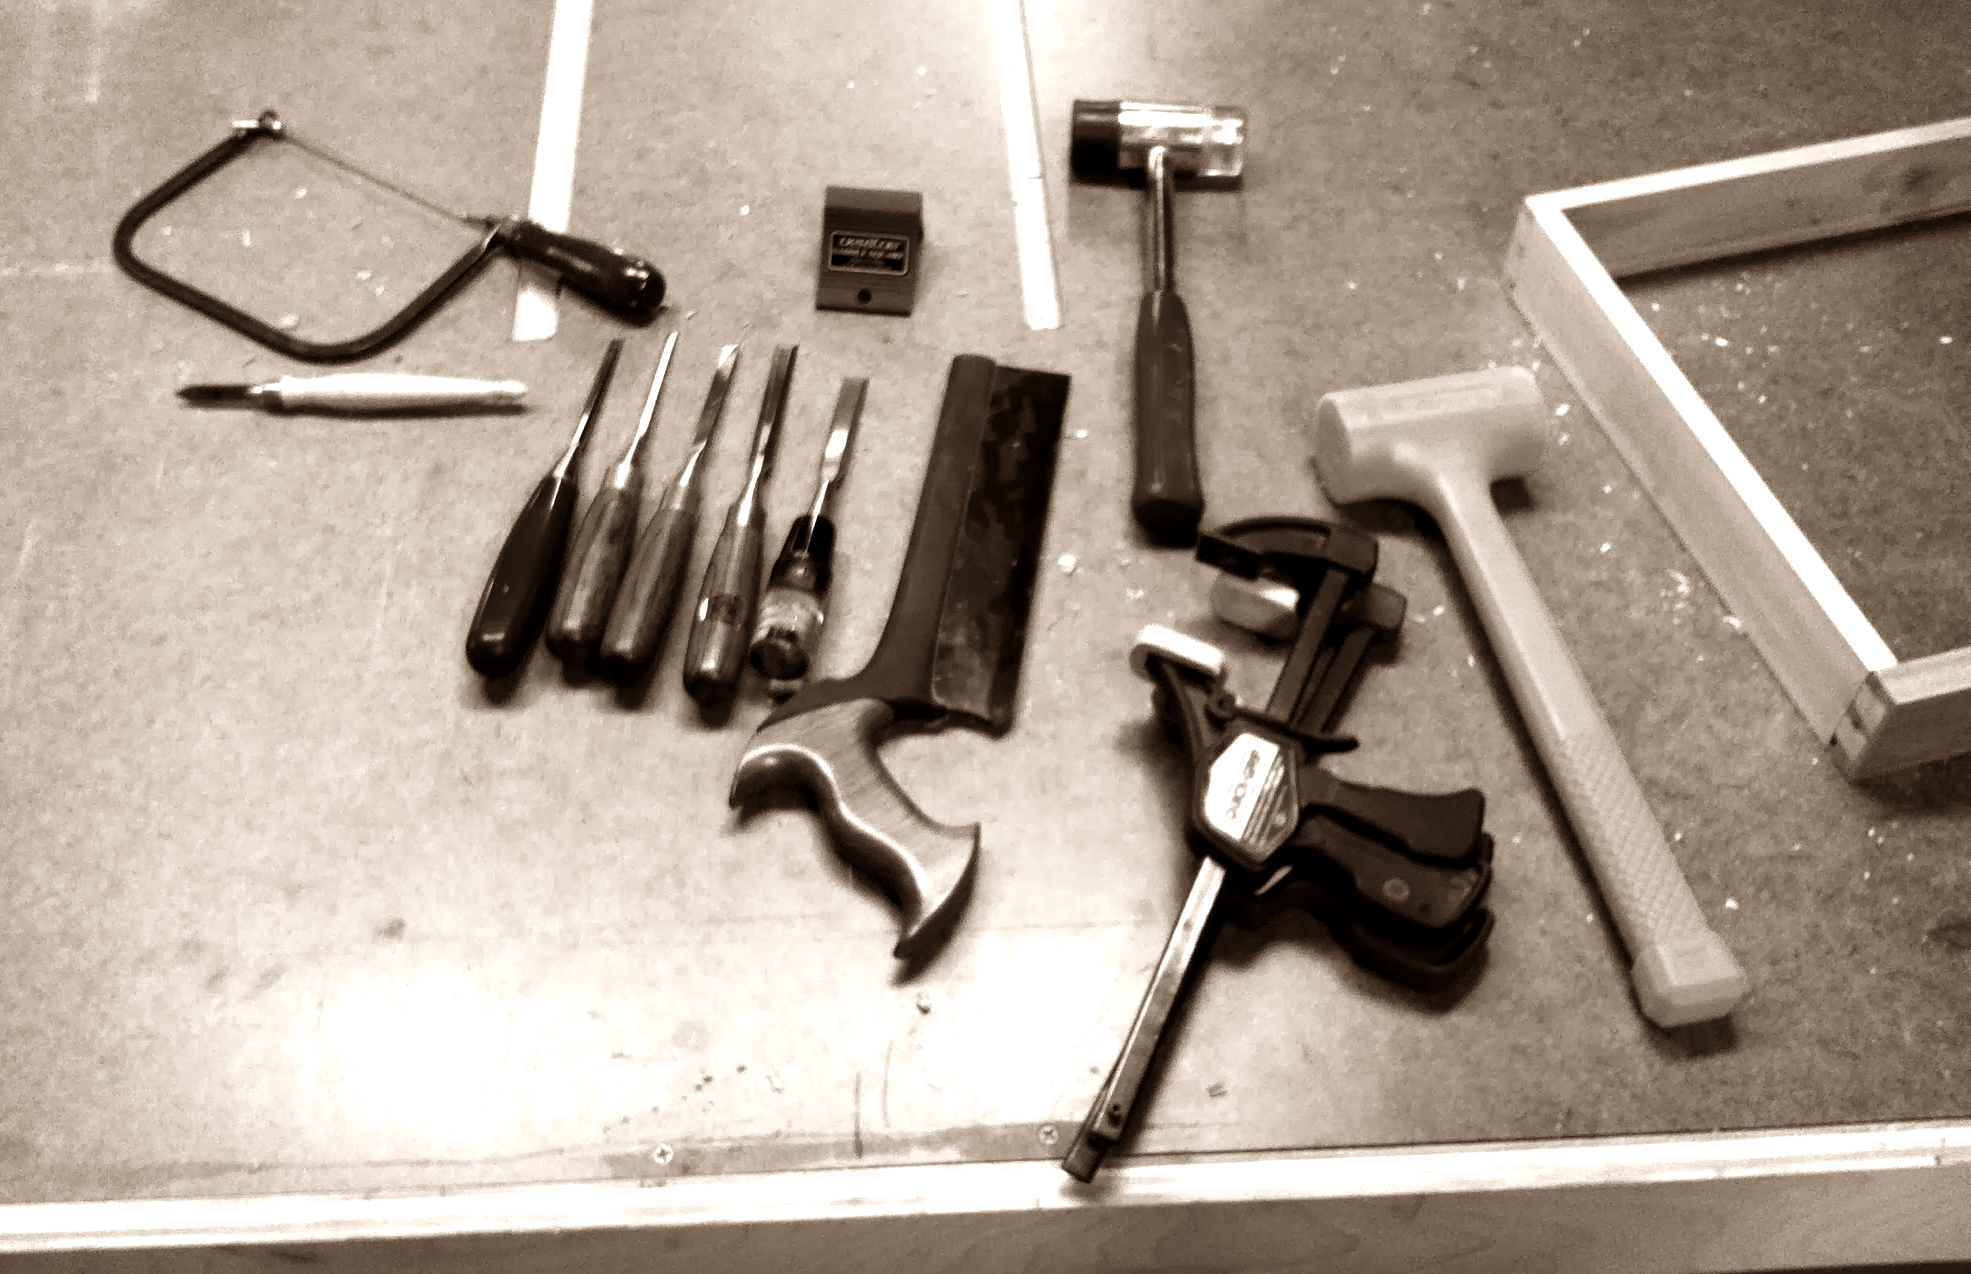 Tools laid out for dovetails